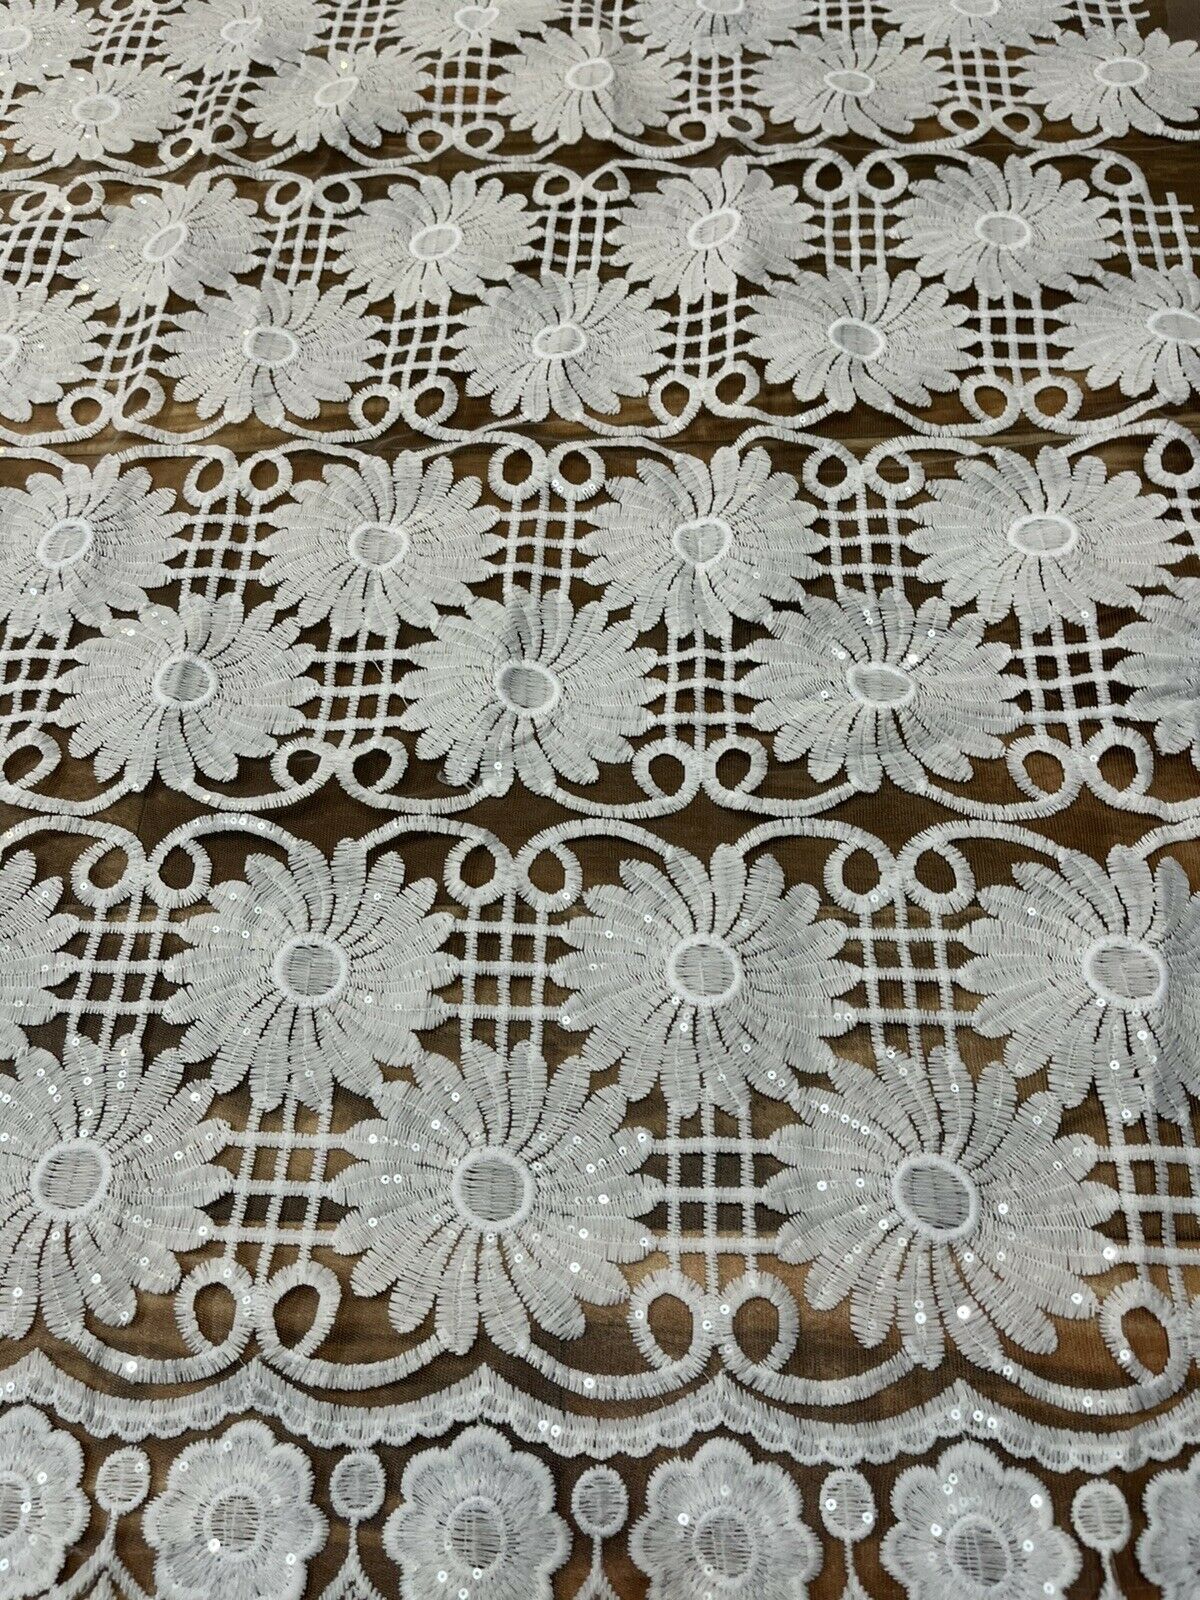 Wedding White Sparkly Embroidery Sequined Lace Fabric